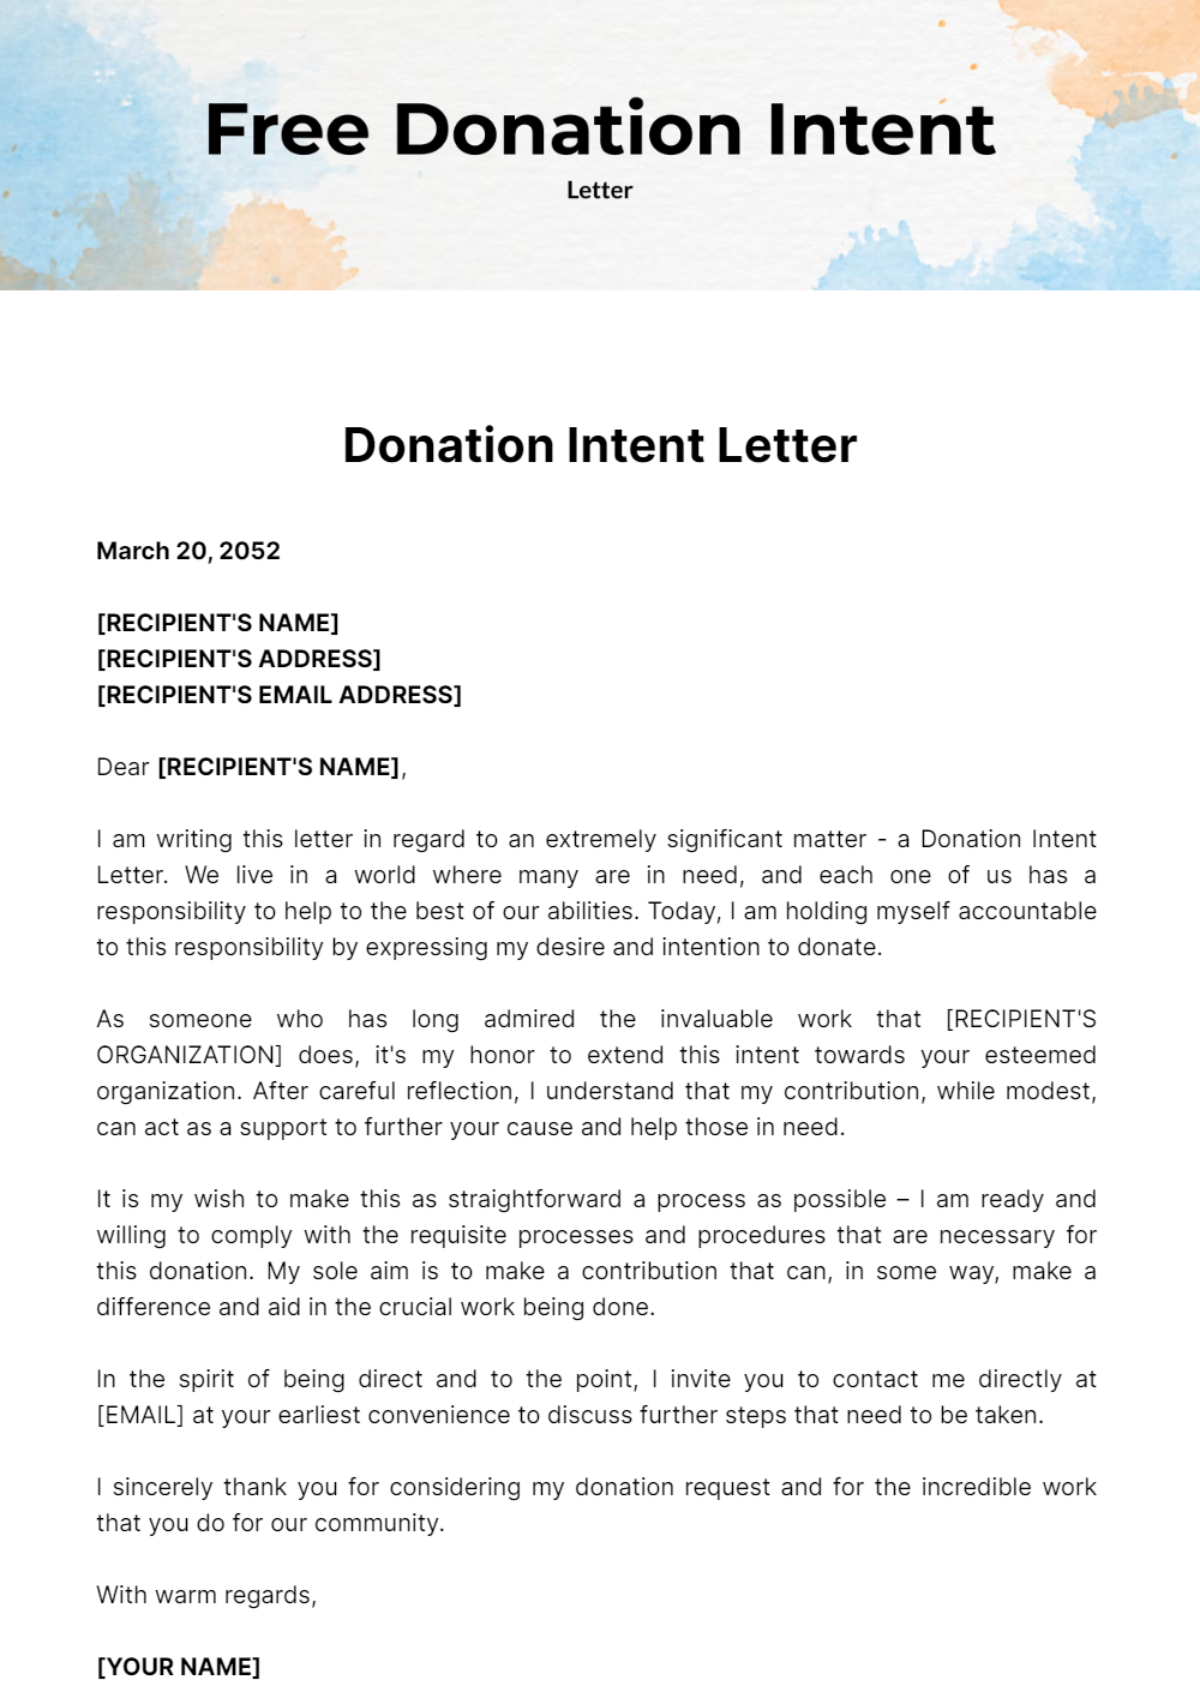 Free Donation Intent Letter Template